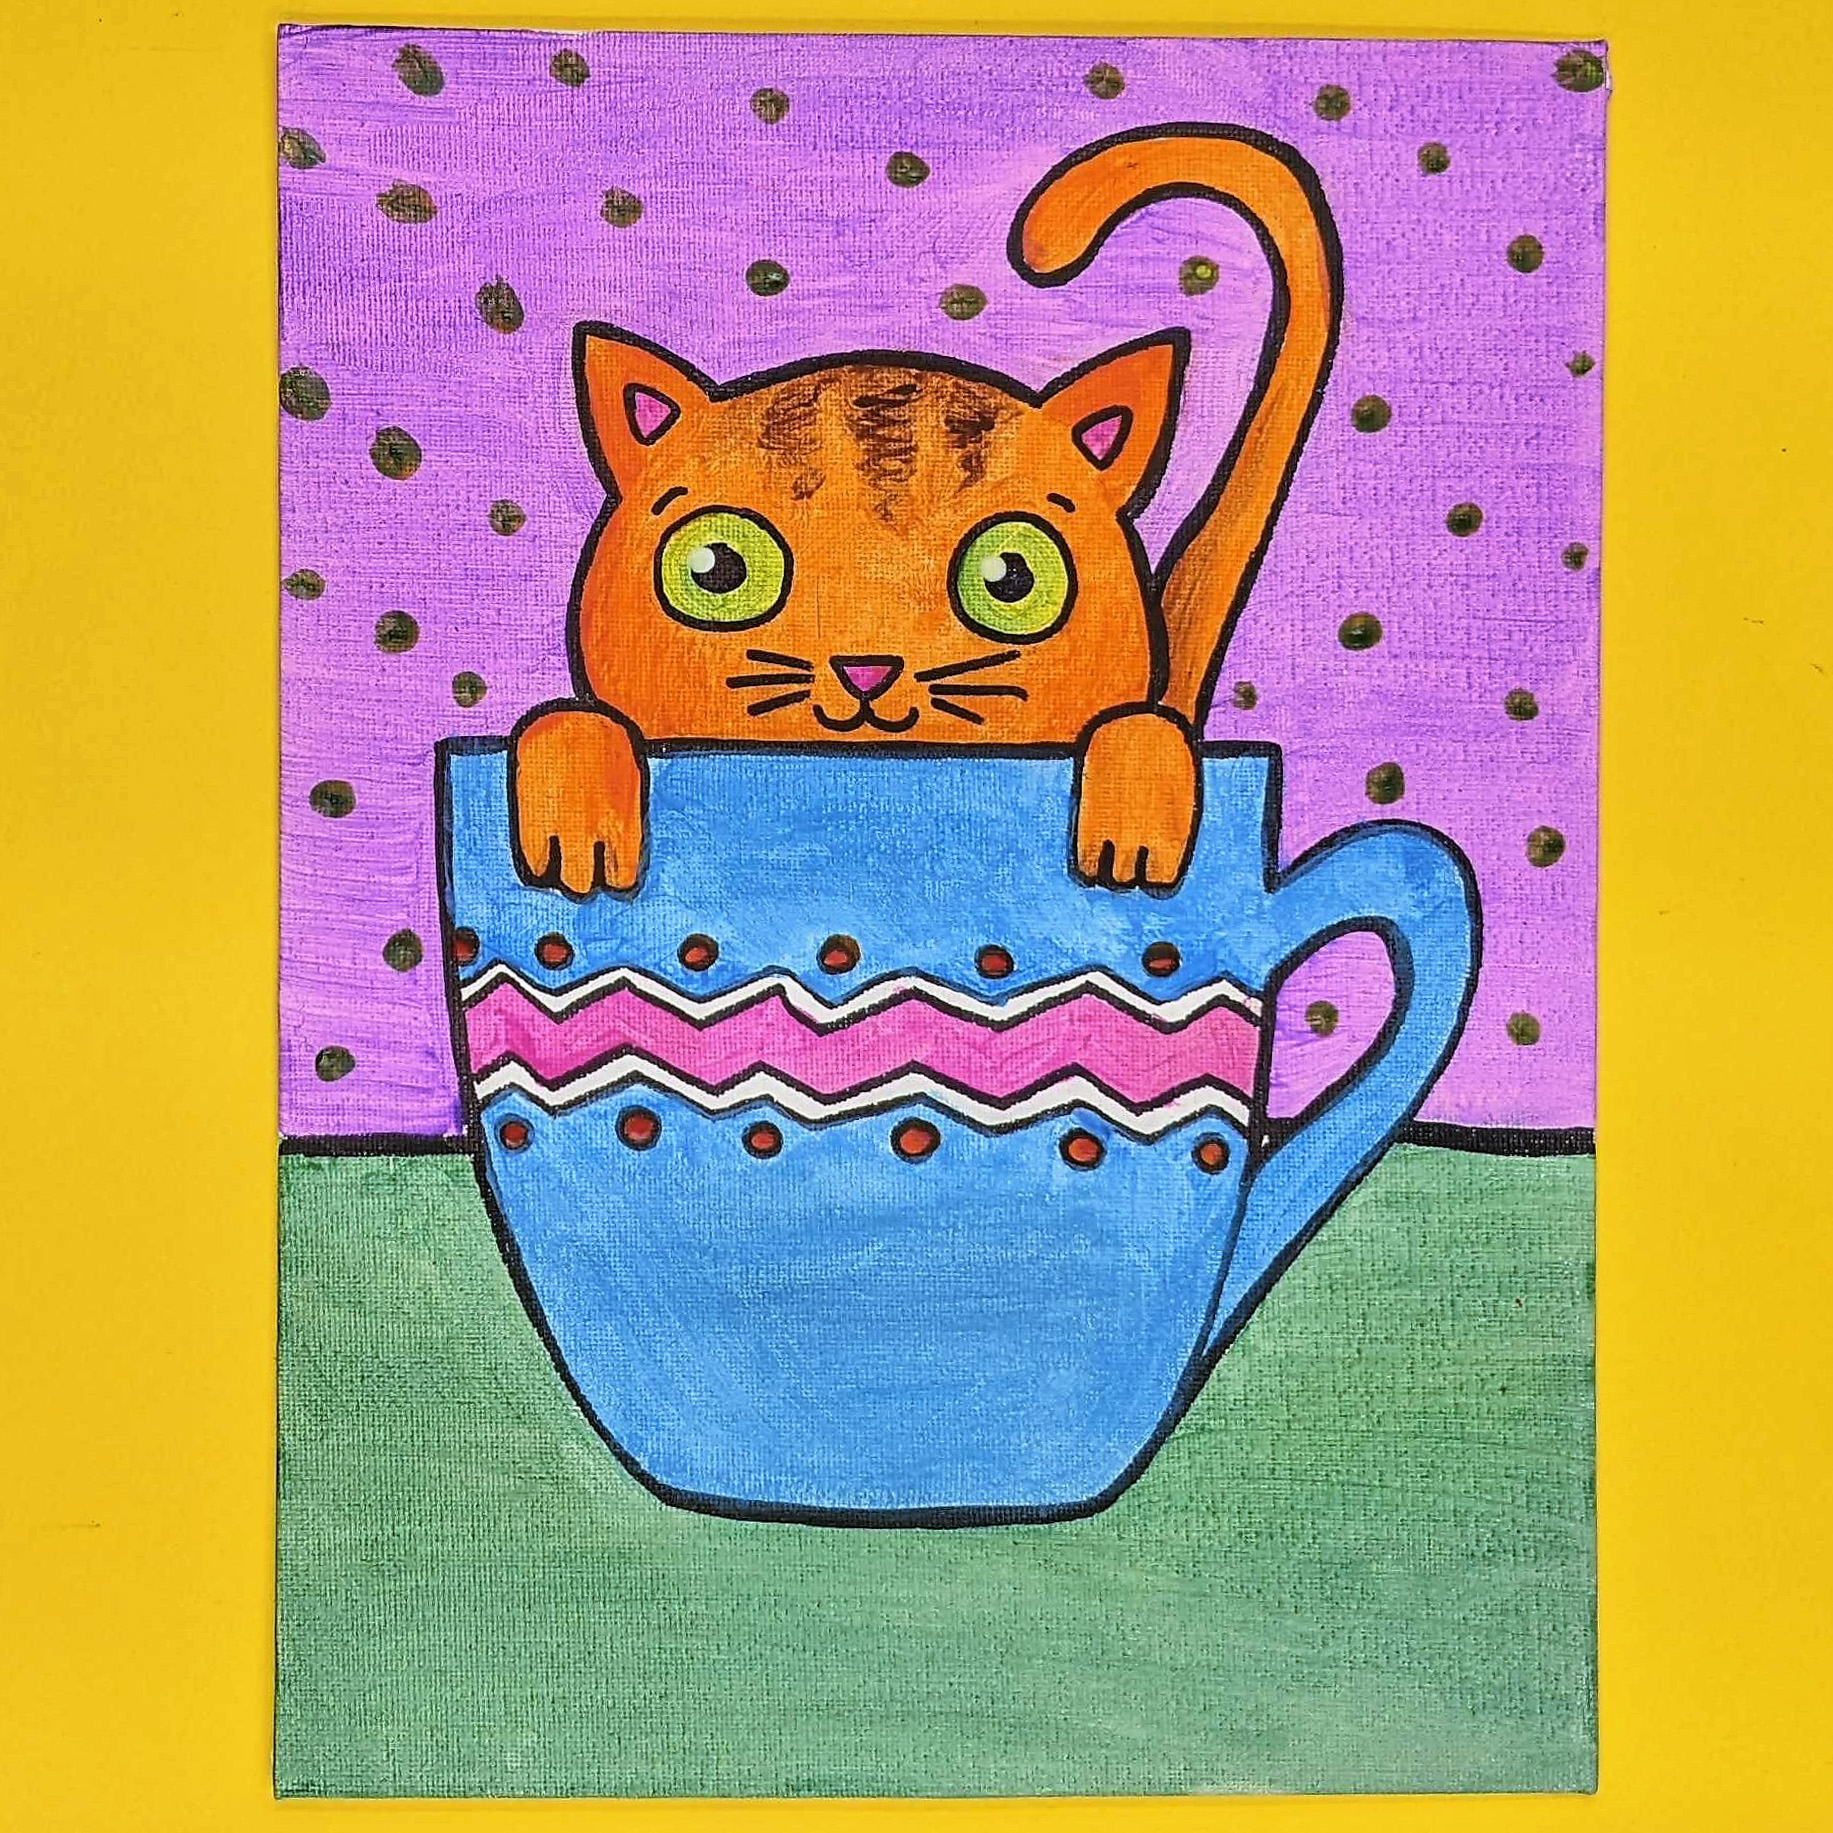 Kidcreate Studio - Chicago Lakeview, Teacup Kitten Art Project